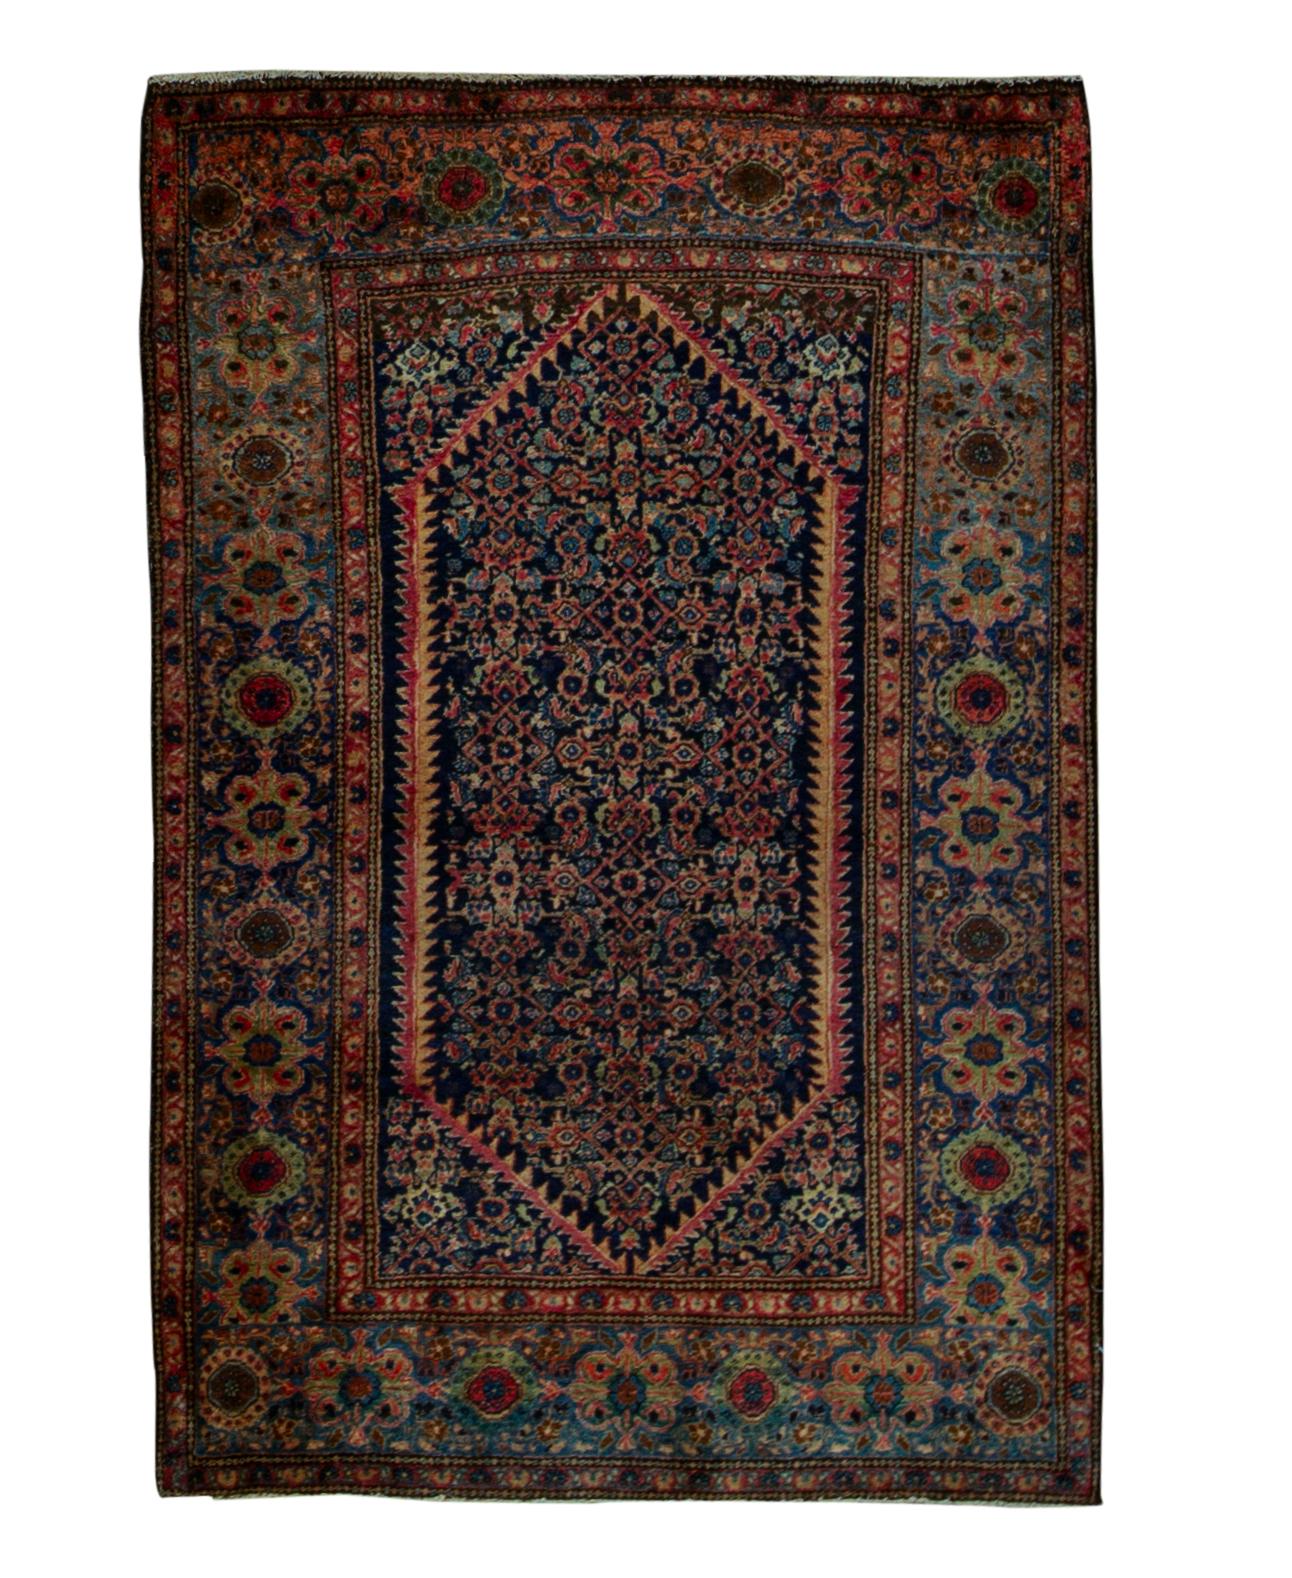   Antique Persian Fine Traditional Handwoven Luxury Wool Multi Rug